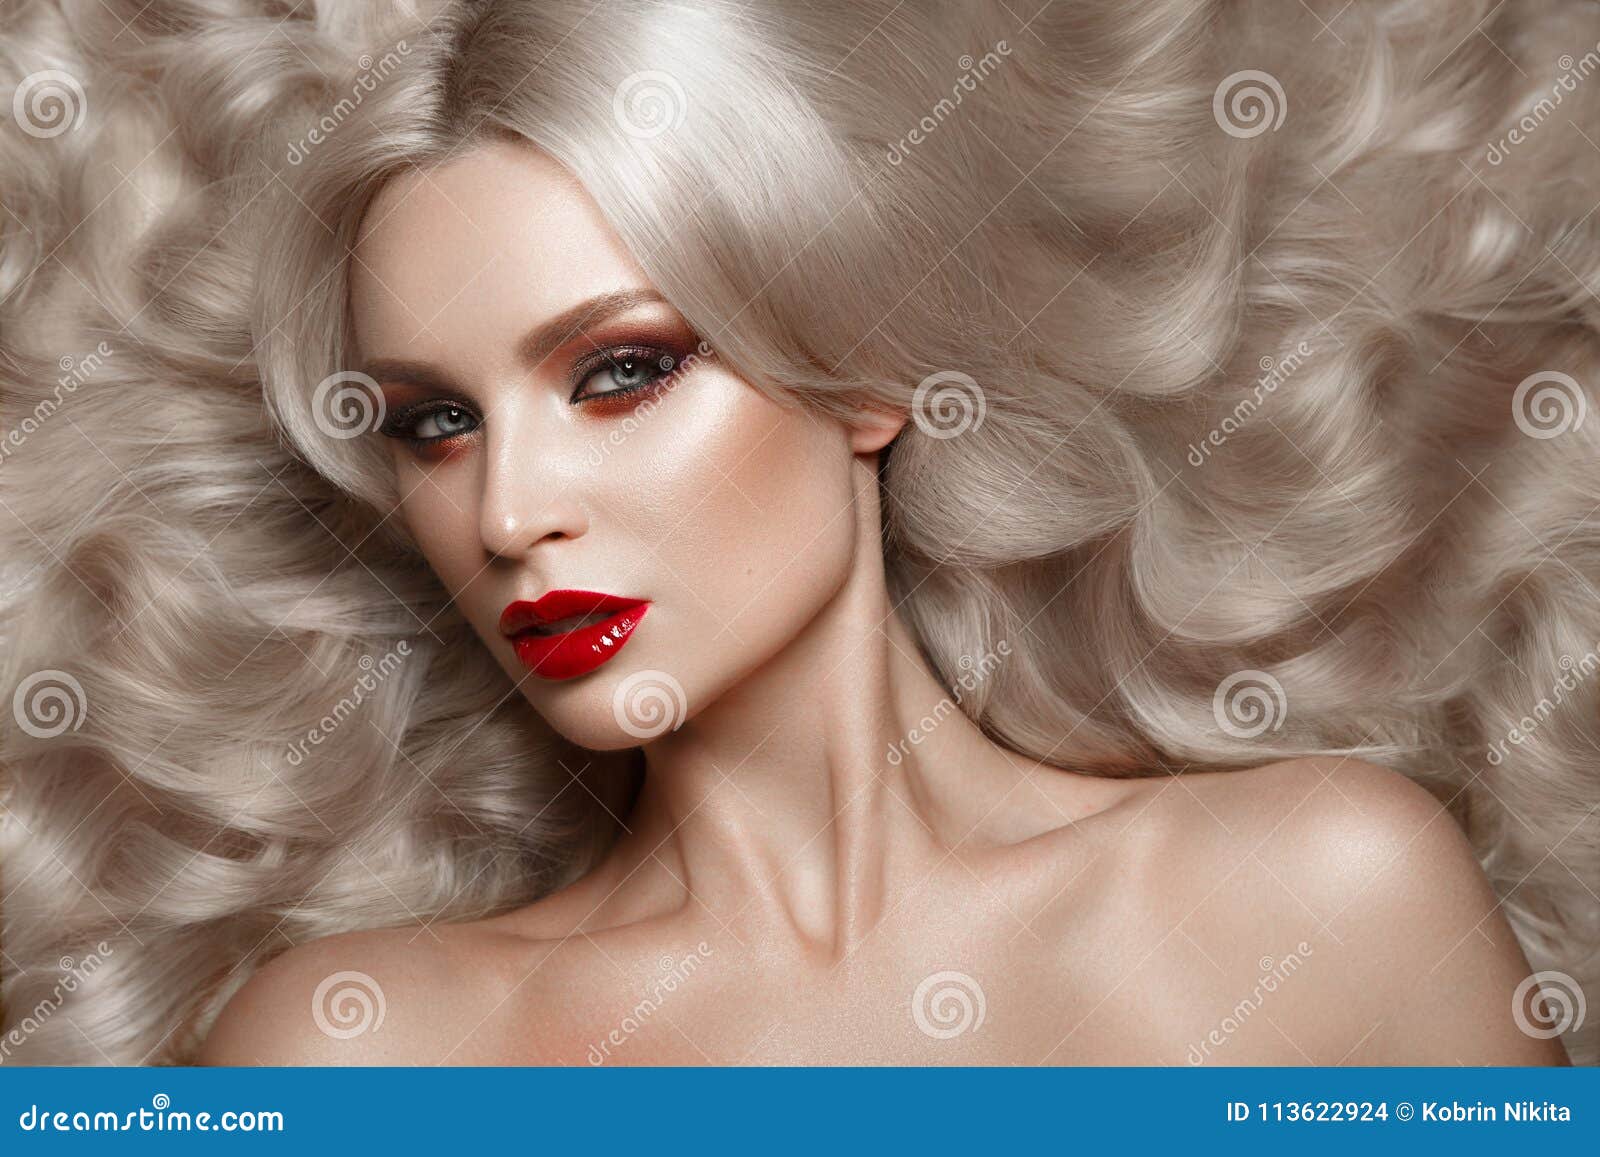 beautiful blonde in a hollywood manner with curls, natural makeup and red lips. beauty face and hair.